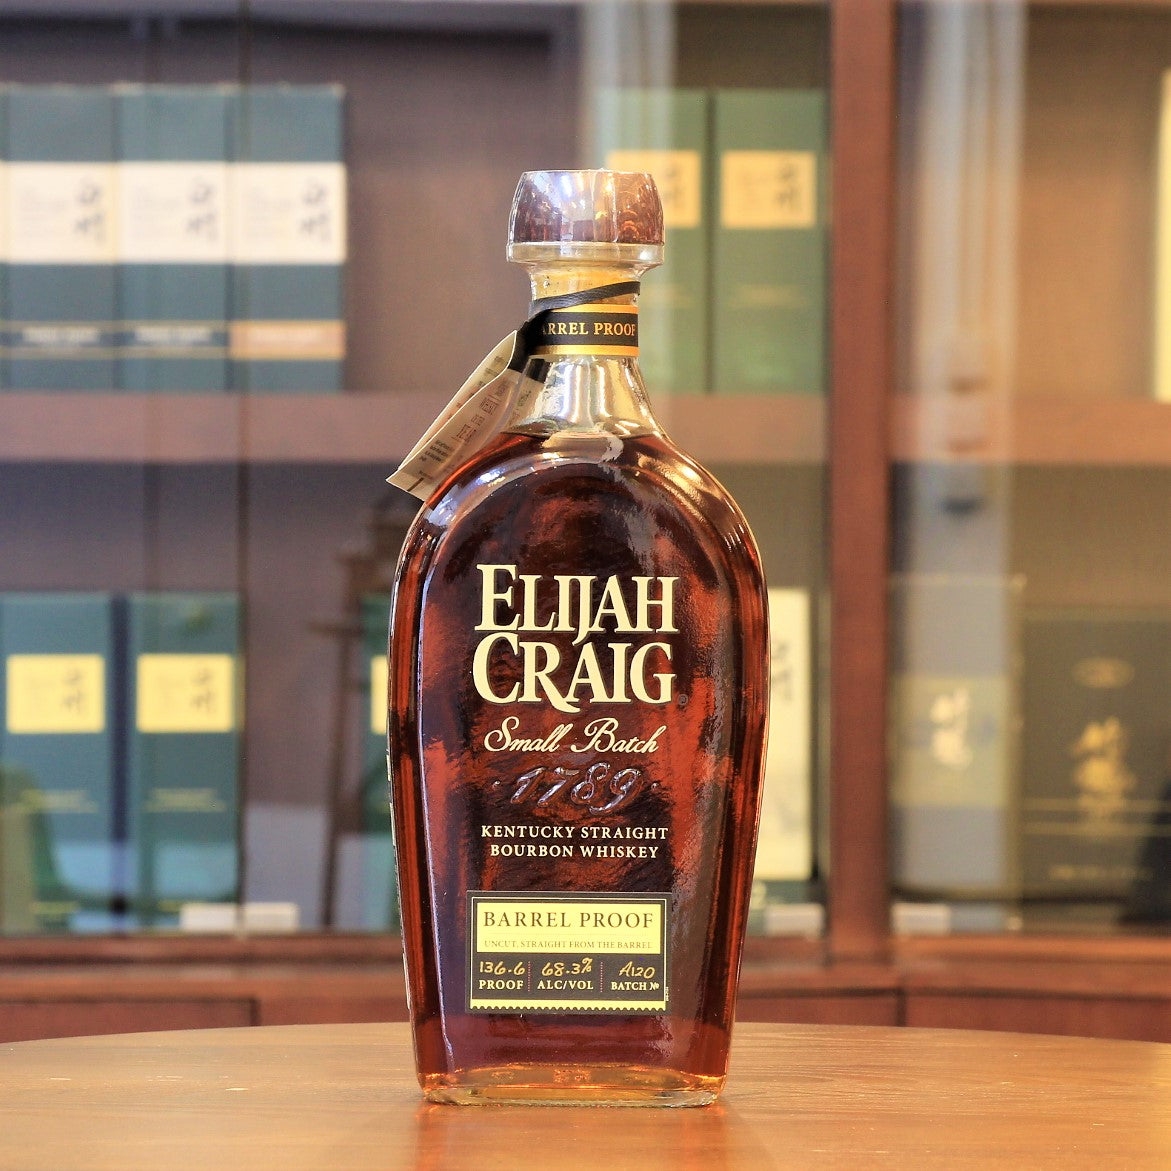 Region: Kentucky (USA)  Distillery: Elijah Craig  Age: 12 Years Old  ABV: 68.3%  Size: 750 ml  This Elijah Craig small batch bourbon whiskey is Barrel Proof, meaning cask strength from the barrel, and non-chill filtered. Every batch of Barrel Proof is aged for 12 years in the barrel.  This Batch#A120 is botted at 136.6 proof and first releas in 2020. The first letter of the batch number indicates the order of the release for that year, starting with "A.”